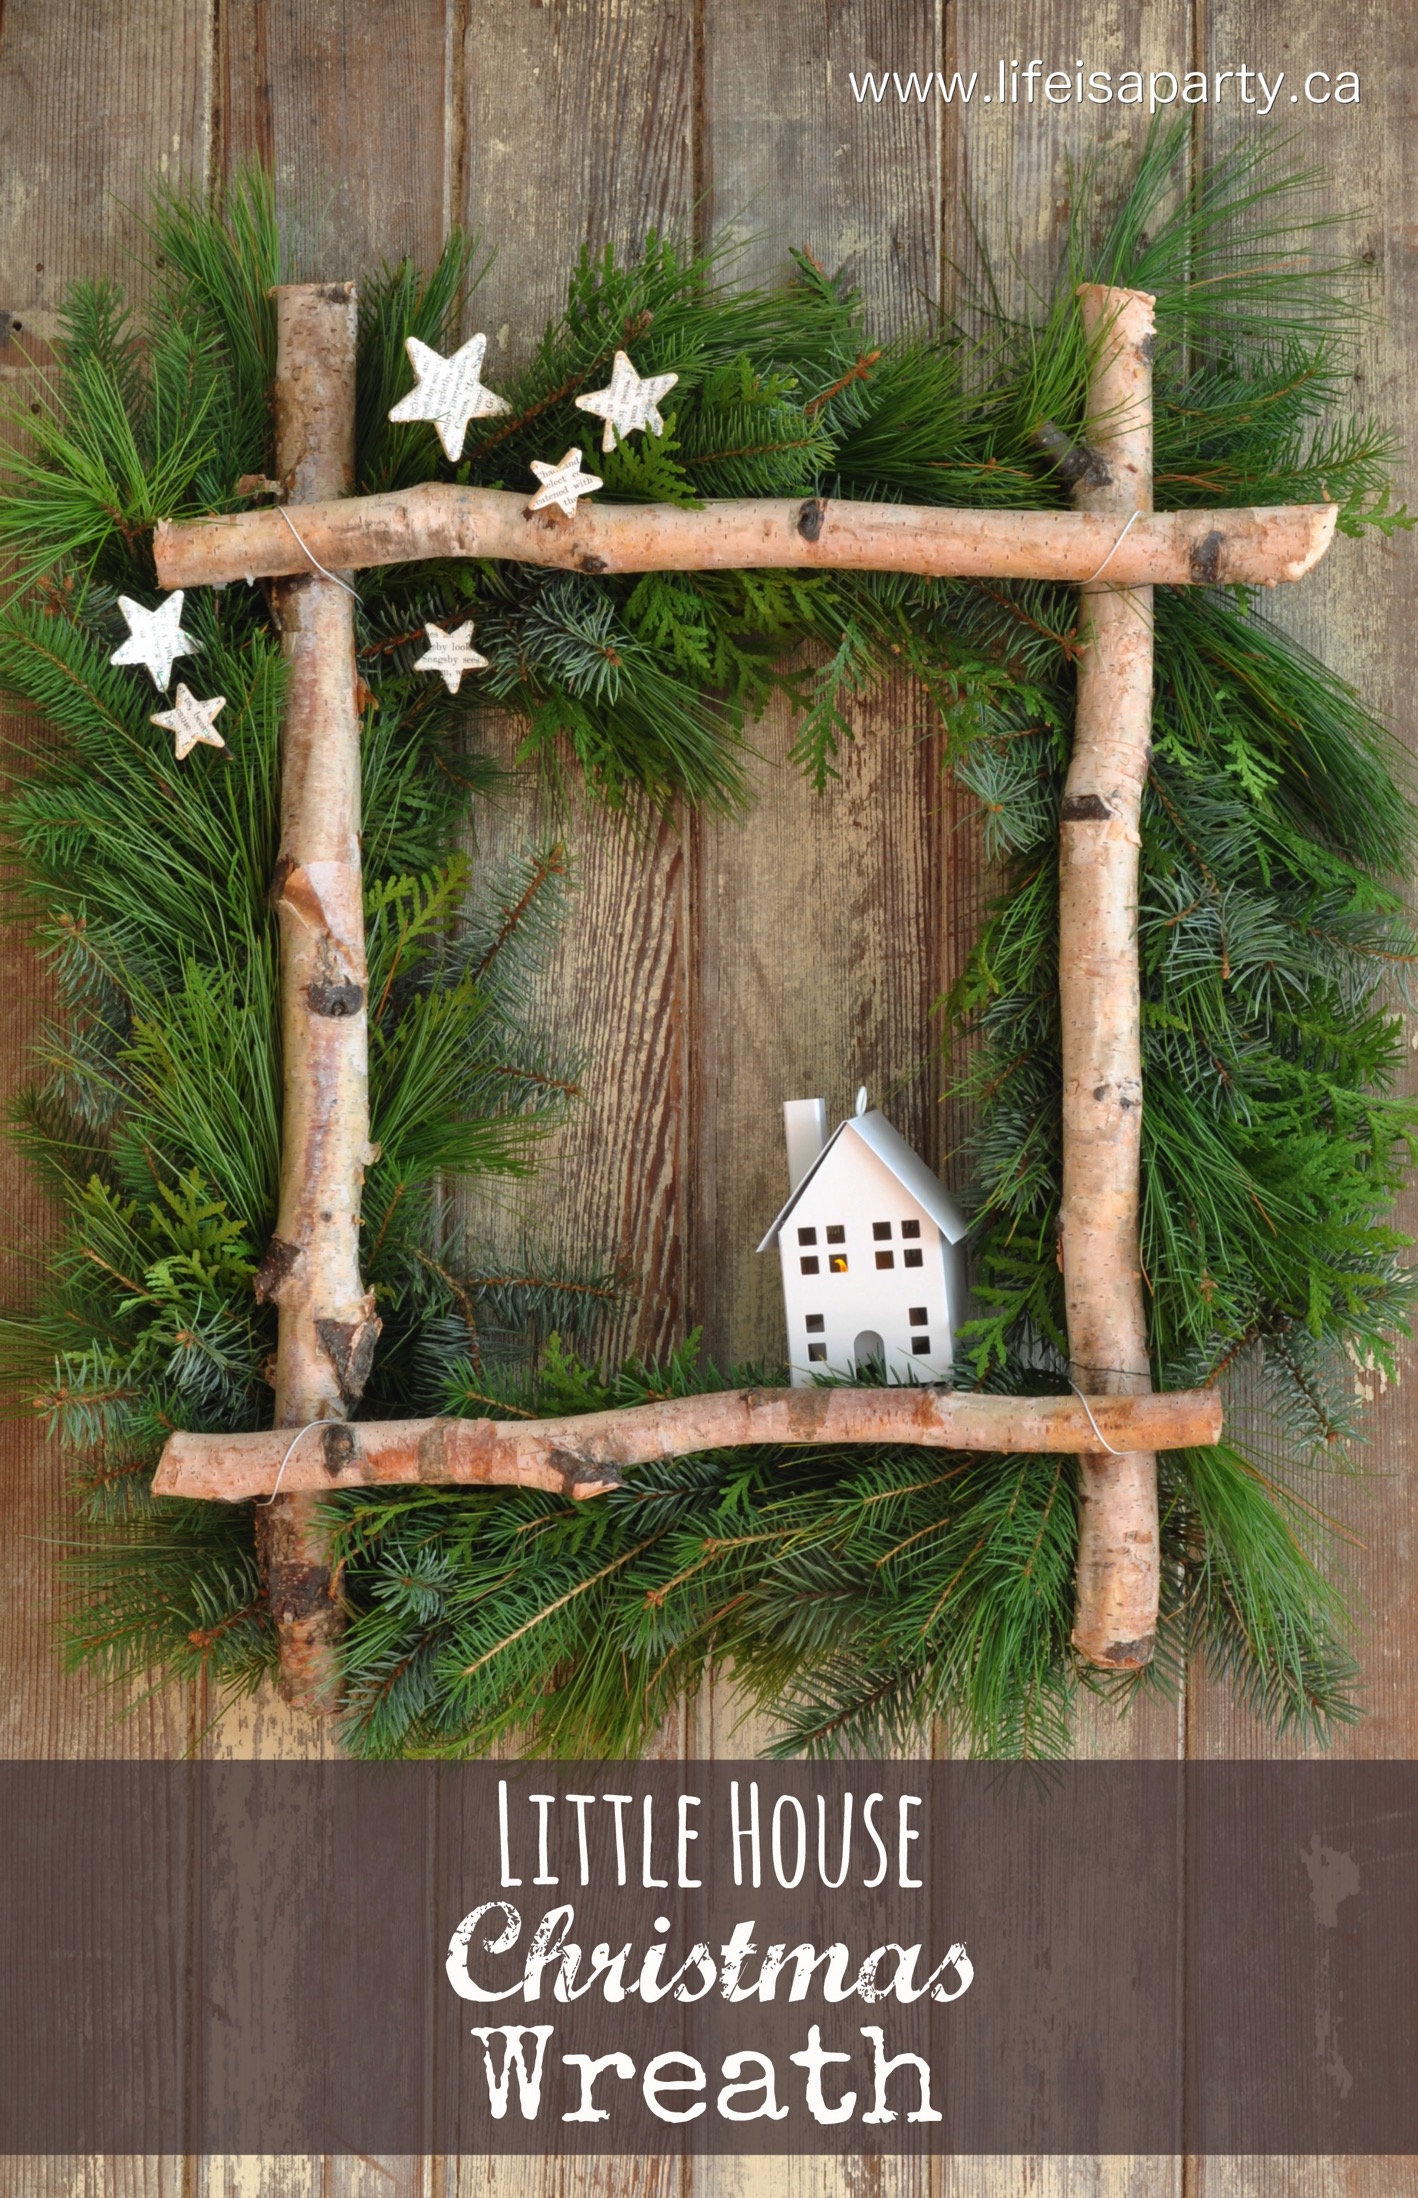 Little House Christmas Wreath -full tutorial to make your own wreath from some gathered greens, birch logs, and a coat hanger. Perfect for Christmas.